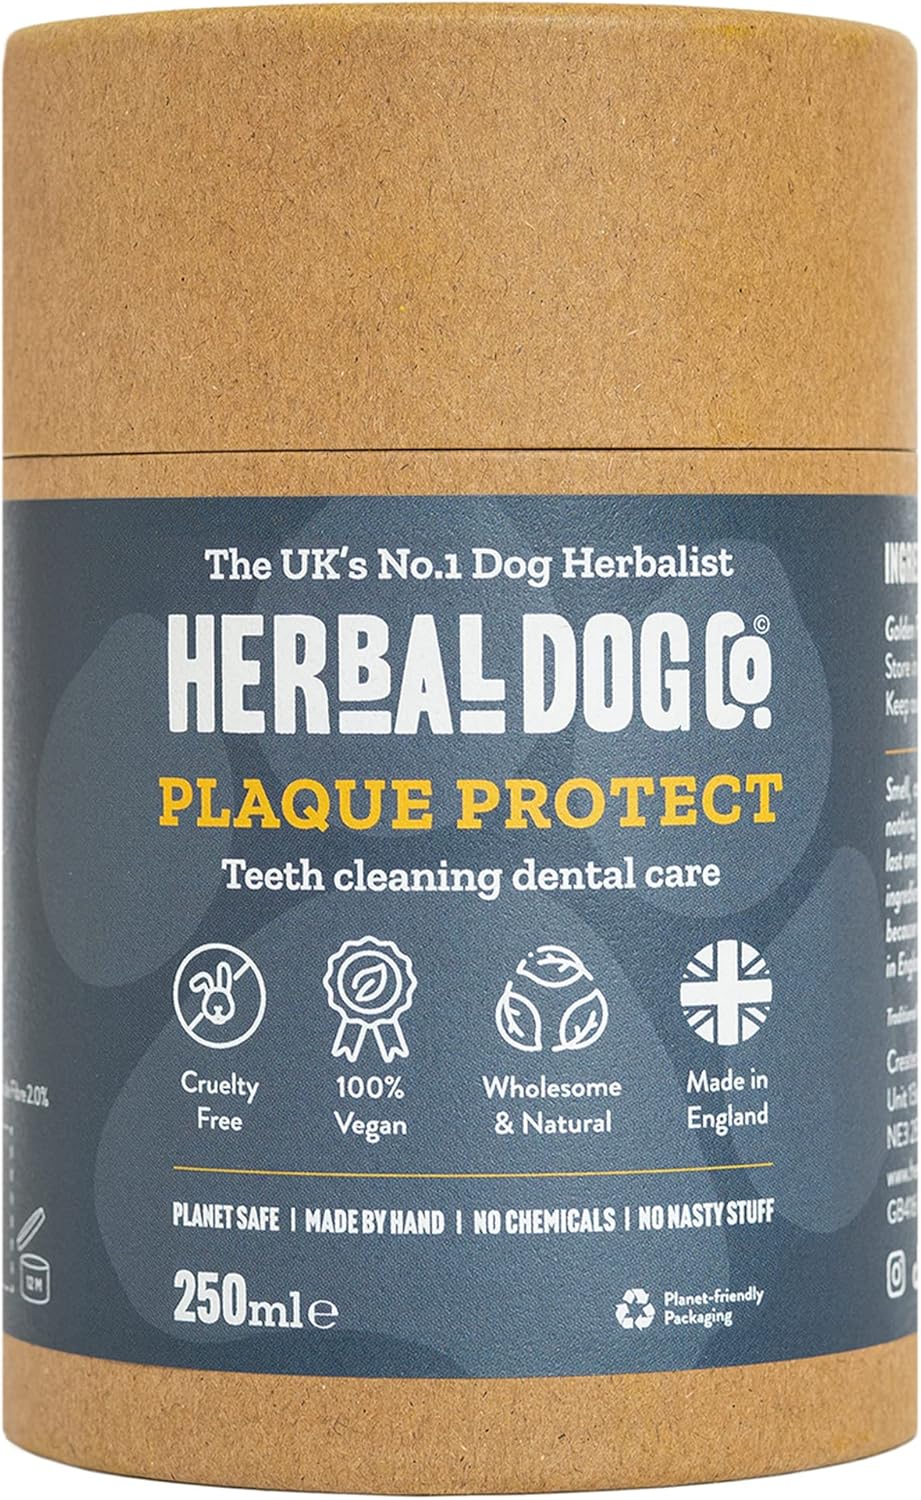 Herbal Dog Co Teeth Cleaning & Dog Breath Freshener Powder, 250ml - No Brushing Needed - Natural Dog Teeth Cleaning Product for Dogs & Puppies - Vegan, Made in UK?5060673050295